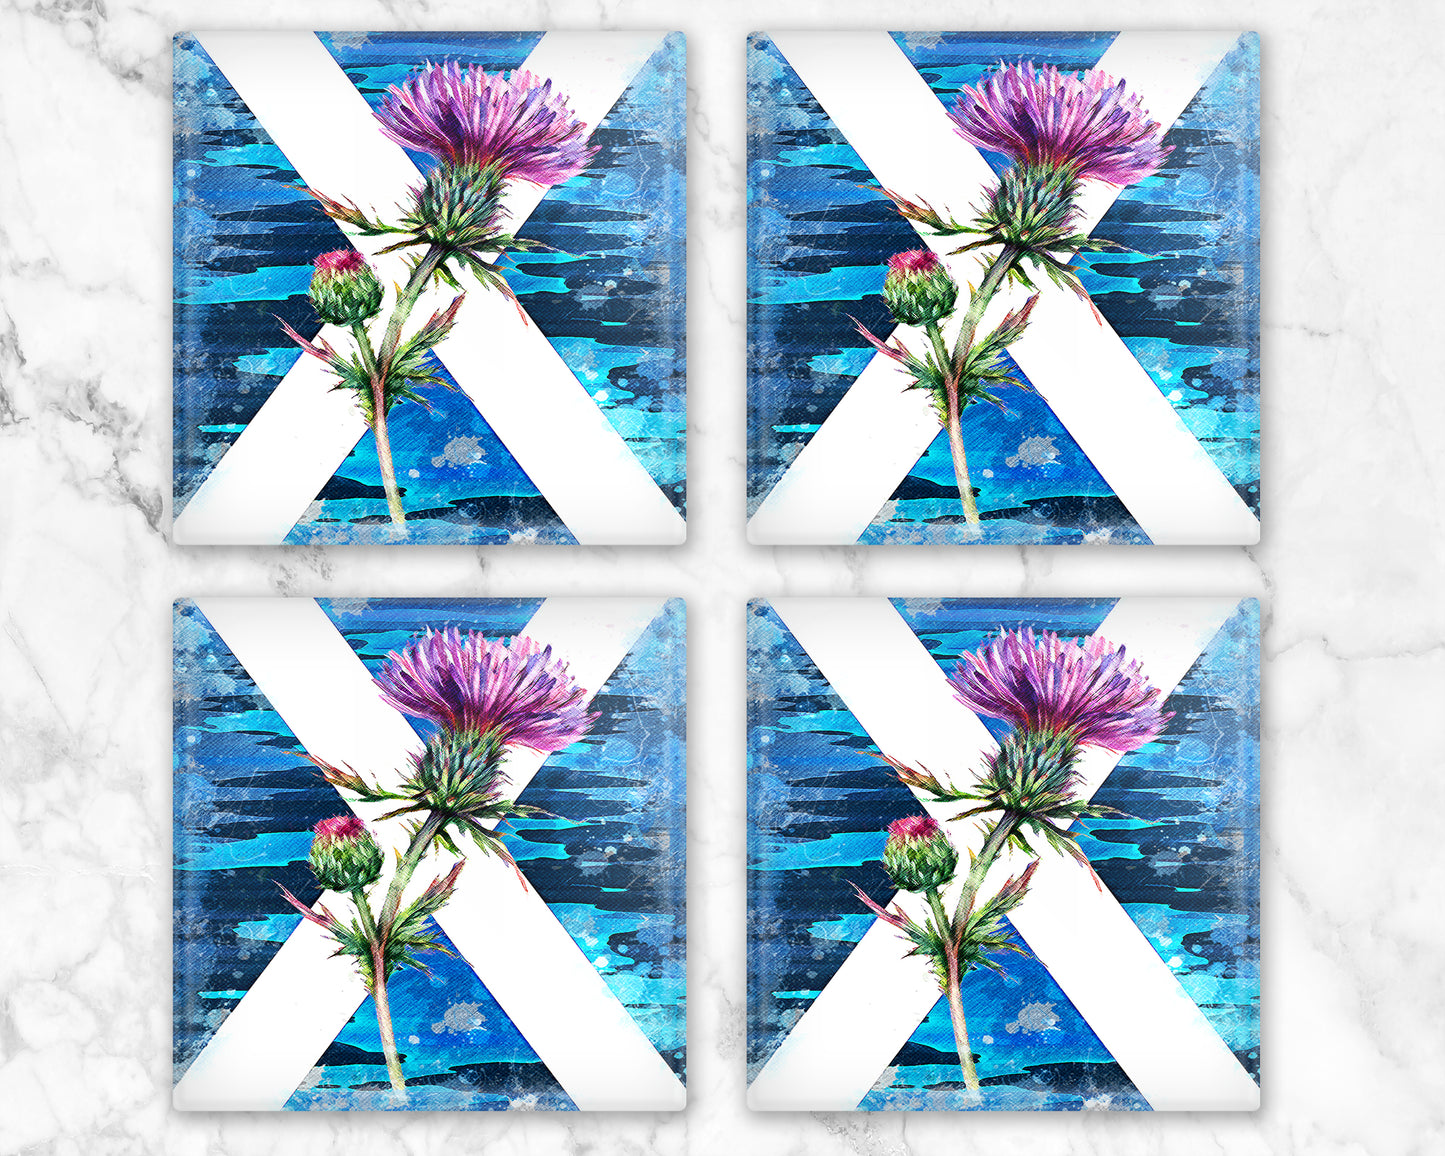 Saltire Abstract Thistle Glass Coaster Set, Scottish Thistle Coaster, Scottish Coaster, Highland Coaster, Scottish Gift, Set of 4 Coasters